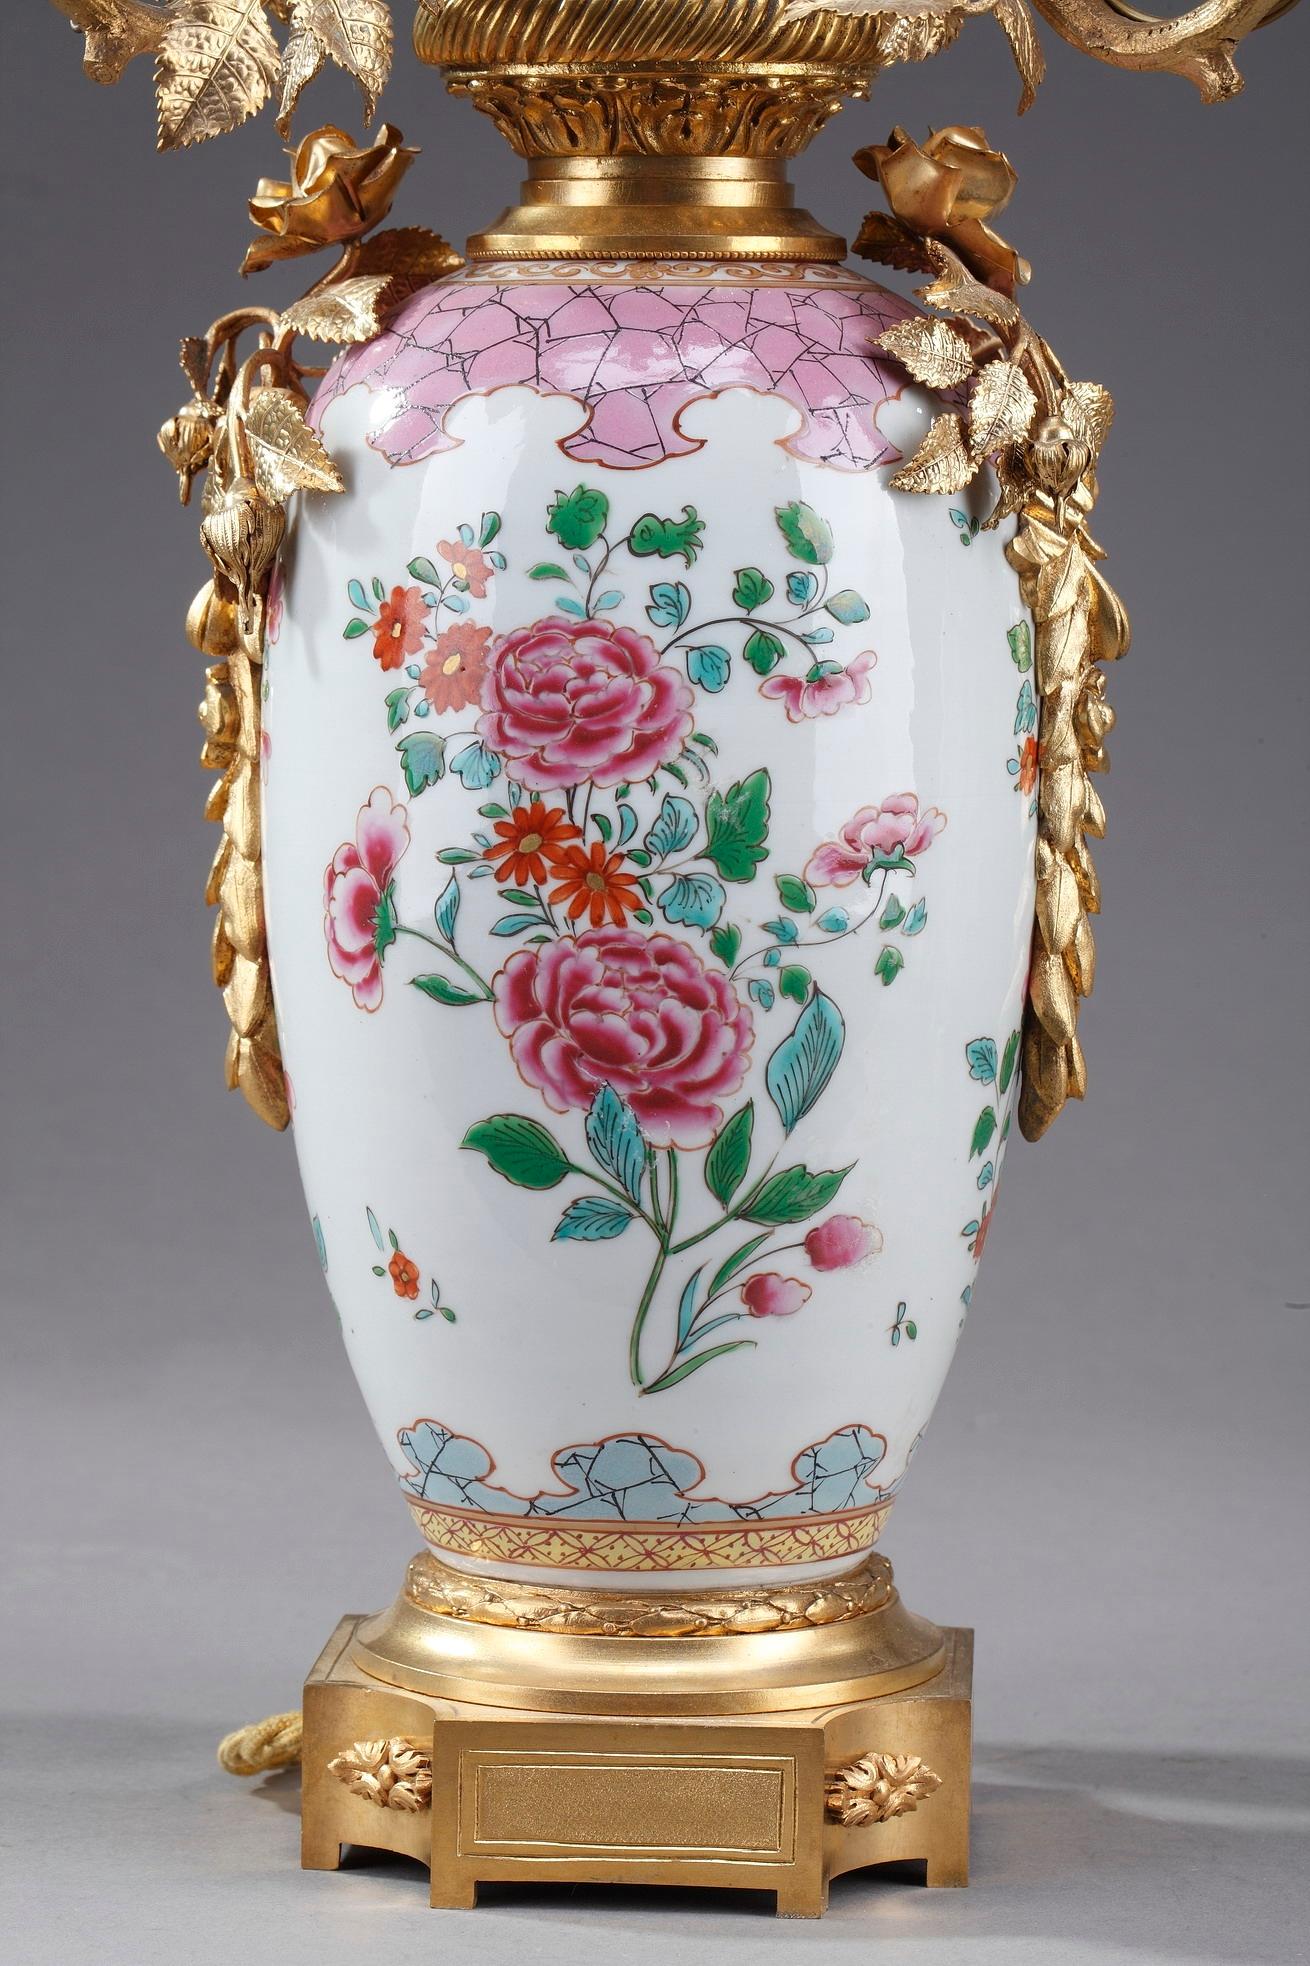 French 19th Century Vases Mounted as Lamps in Famille Rose Porcelain Taste